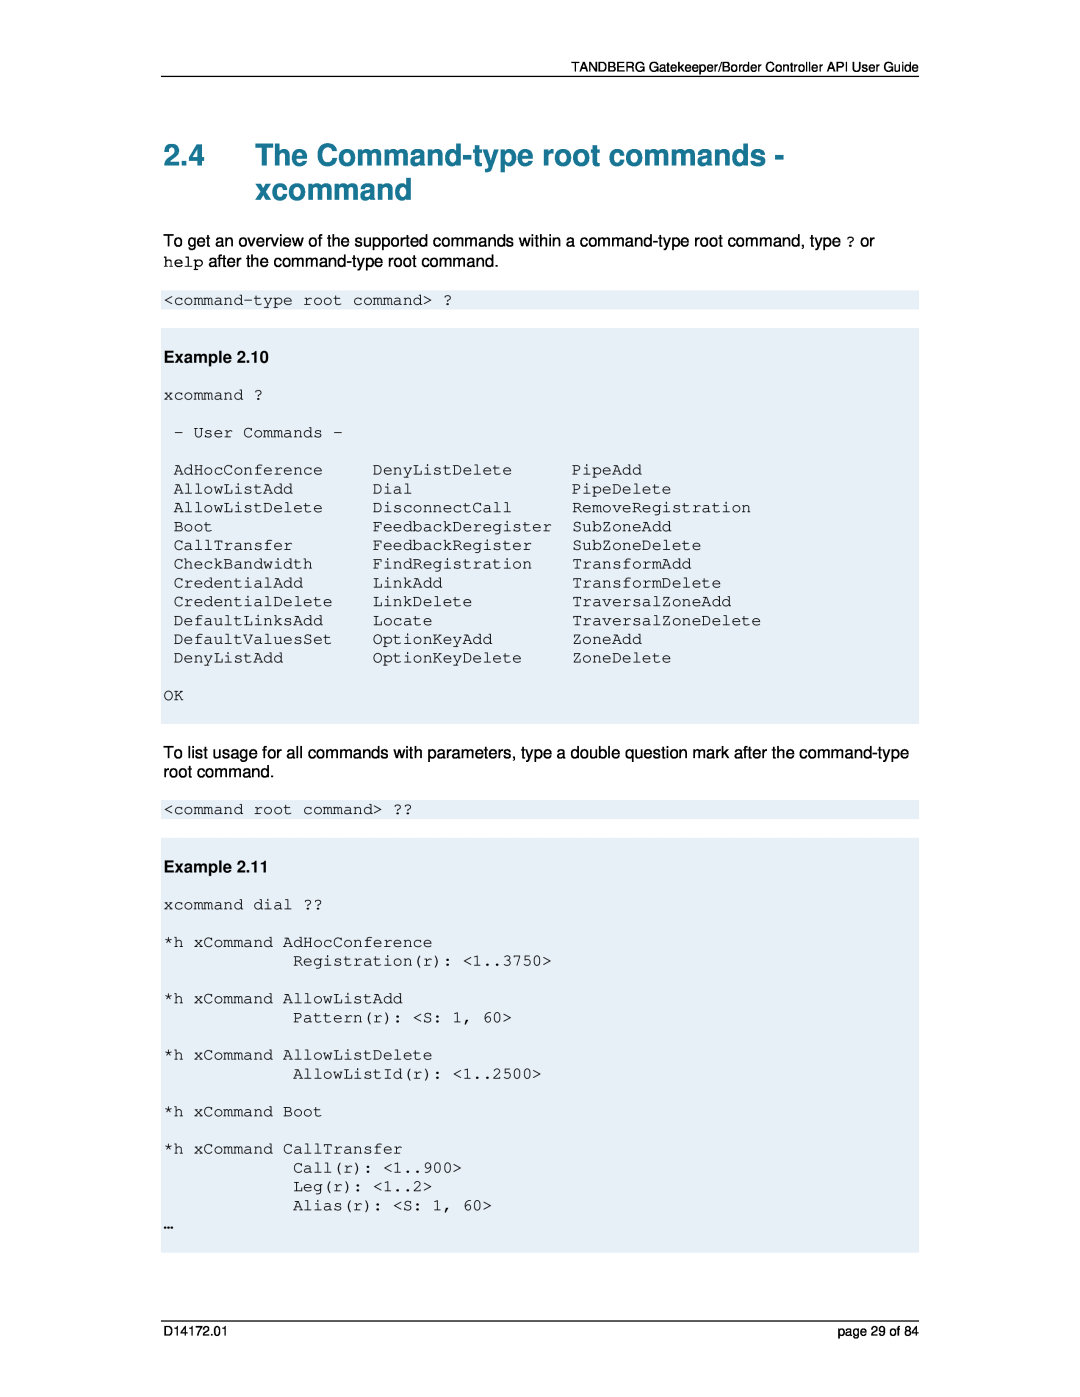 TANDBERG D14172.01 manual The Command-type root commands - xcommand, Example 